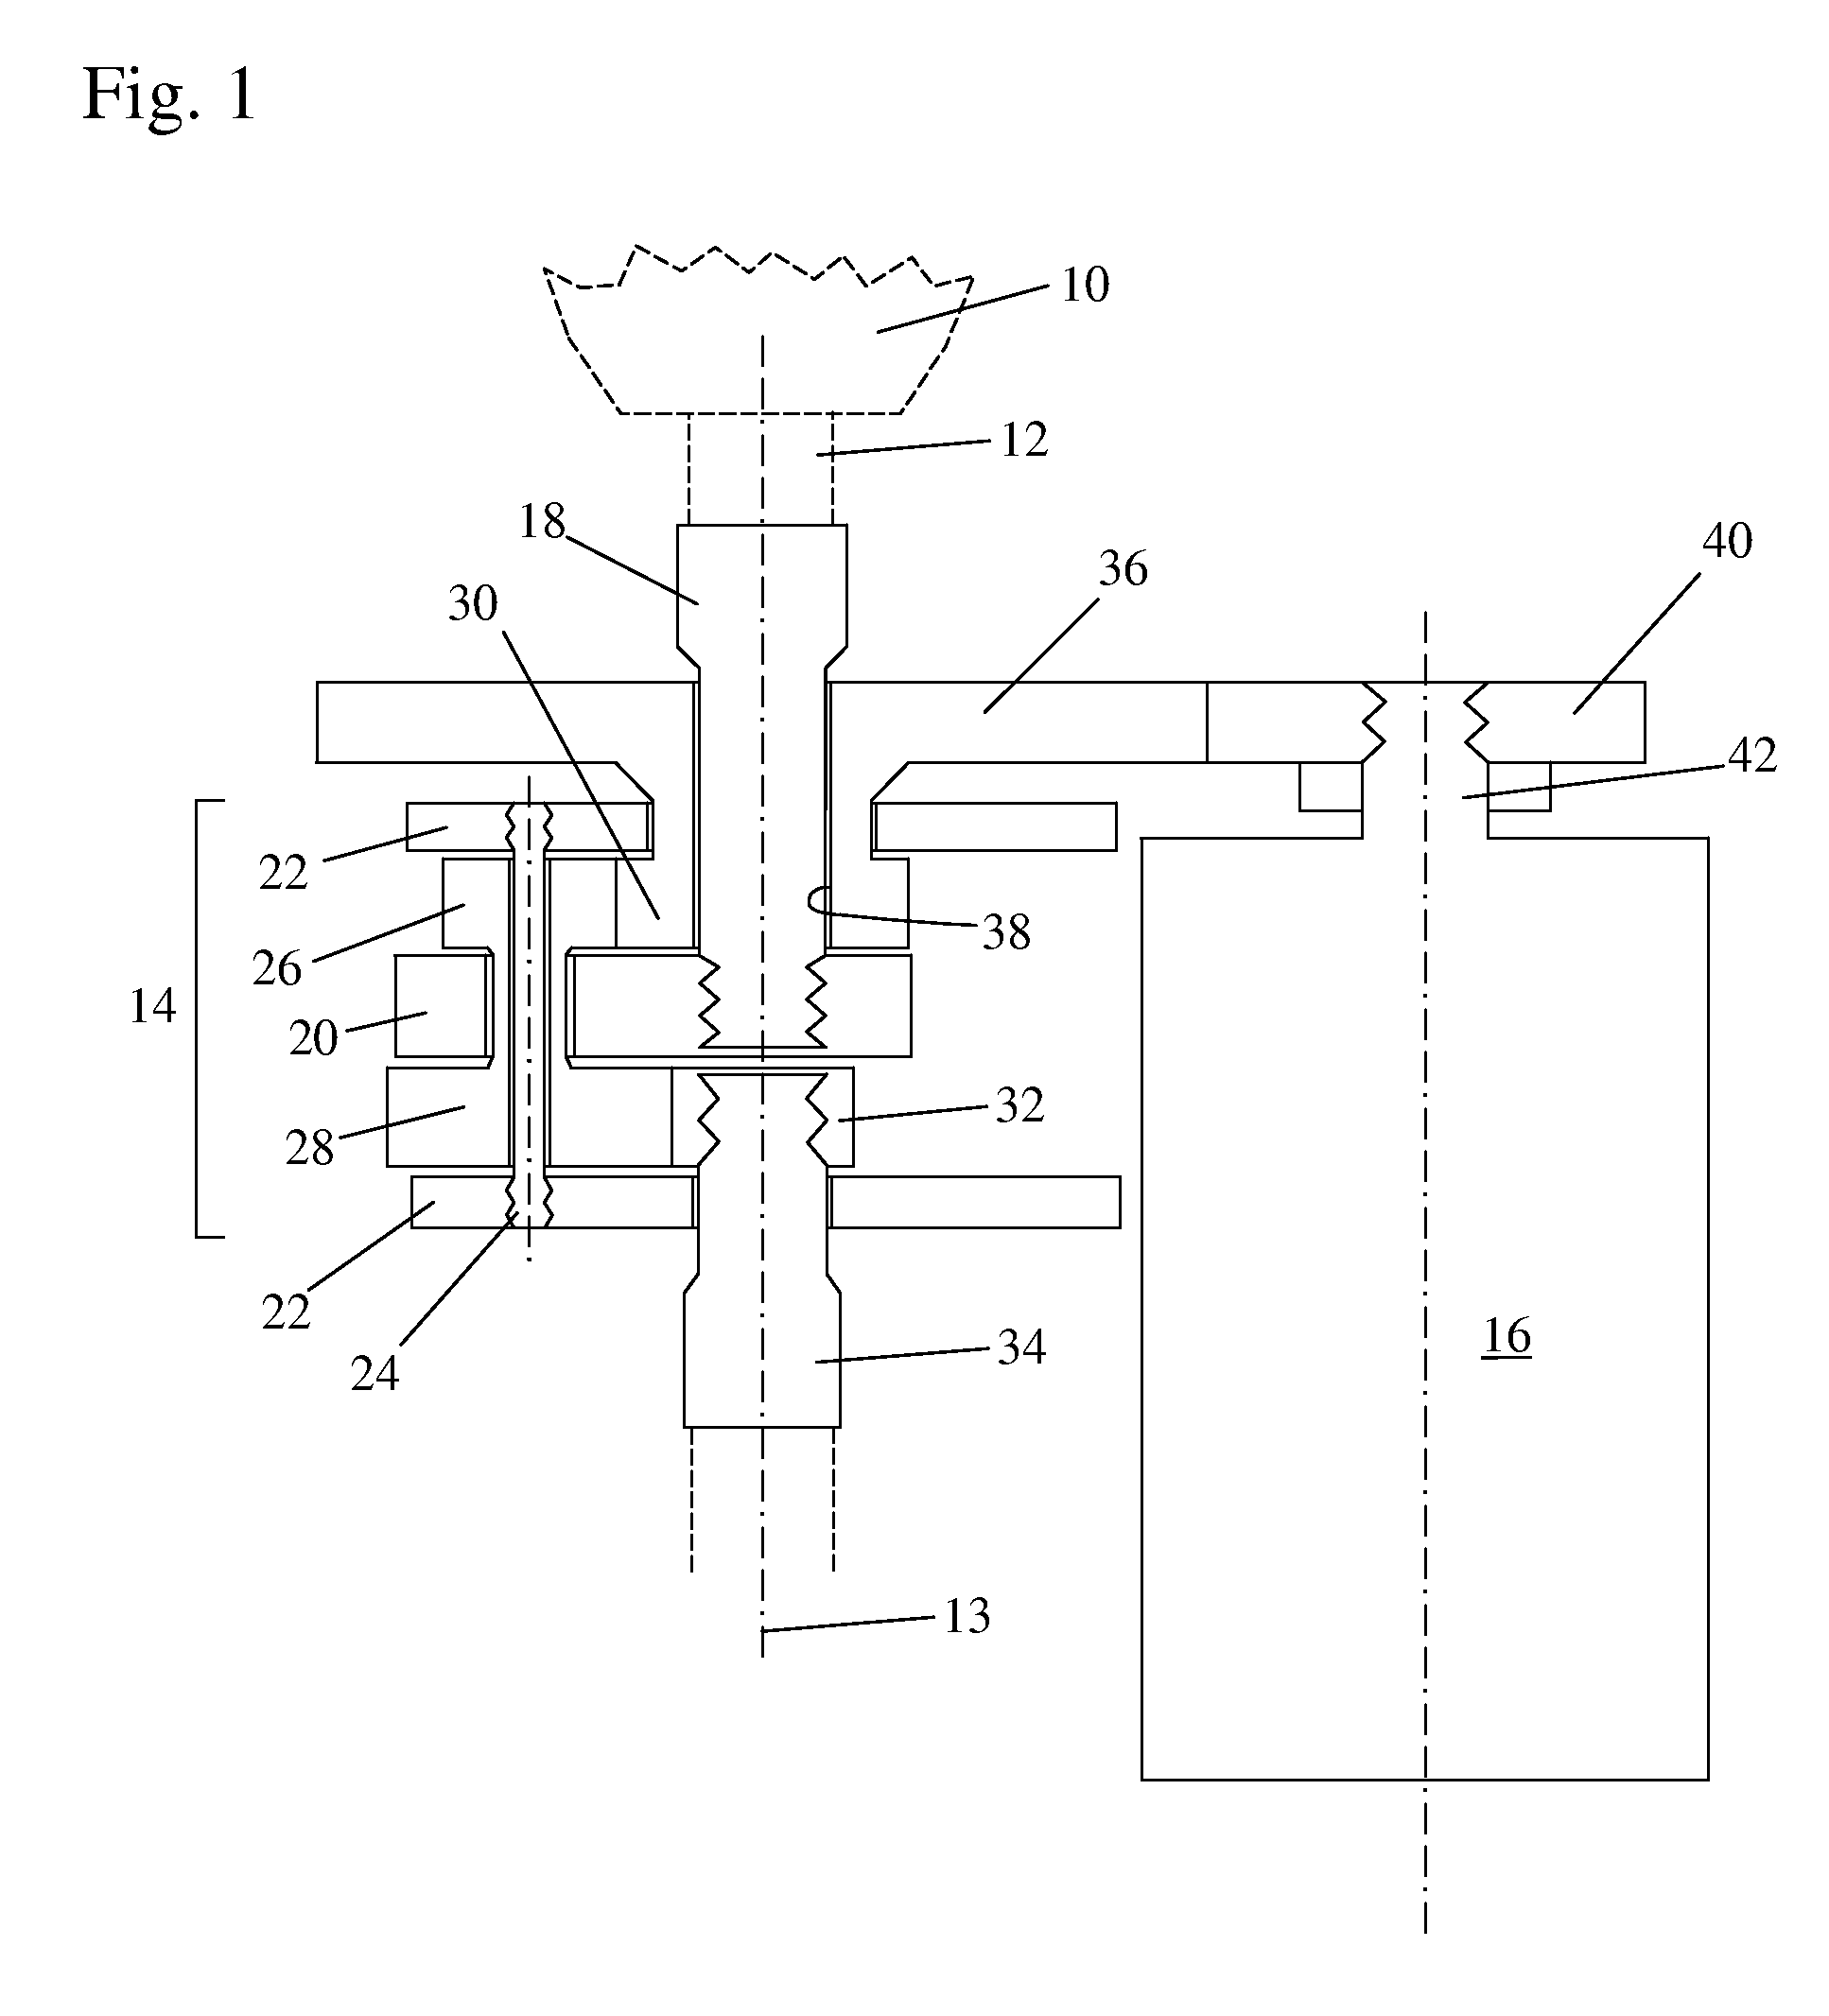 Transmission with resistance torque control